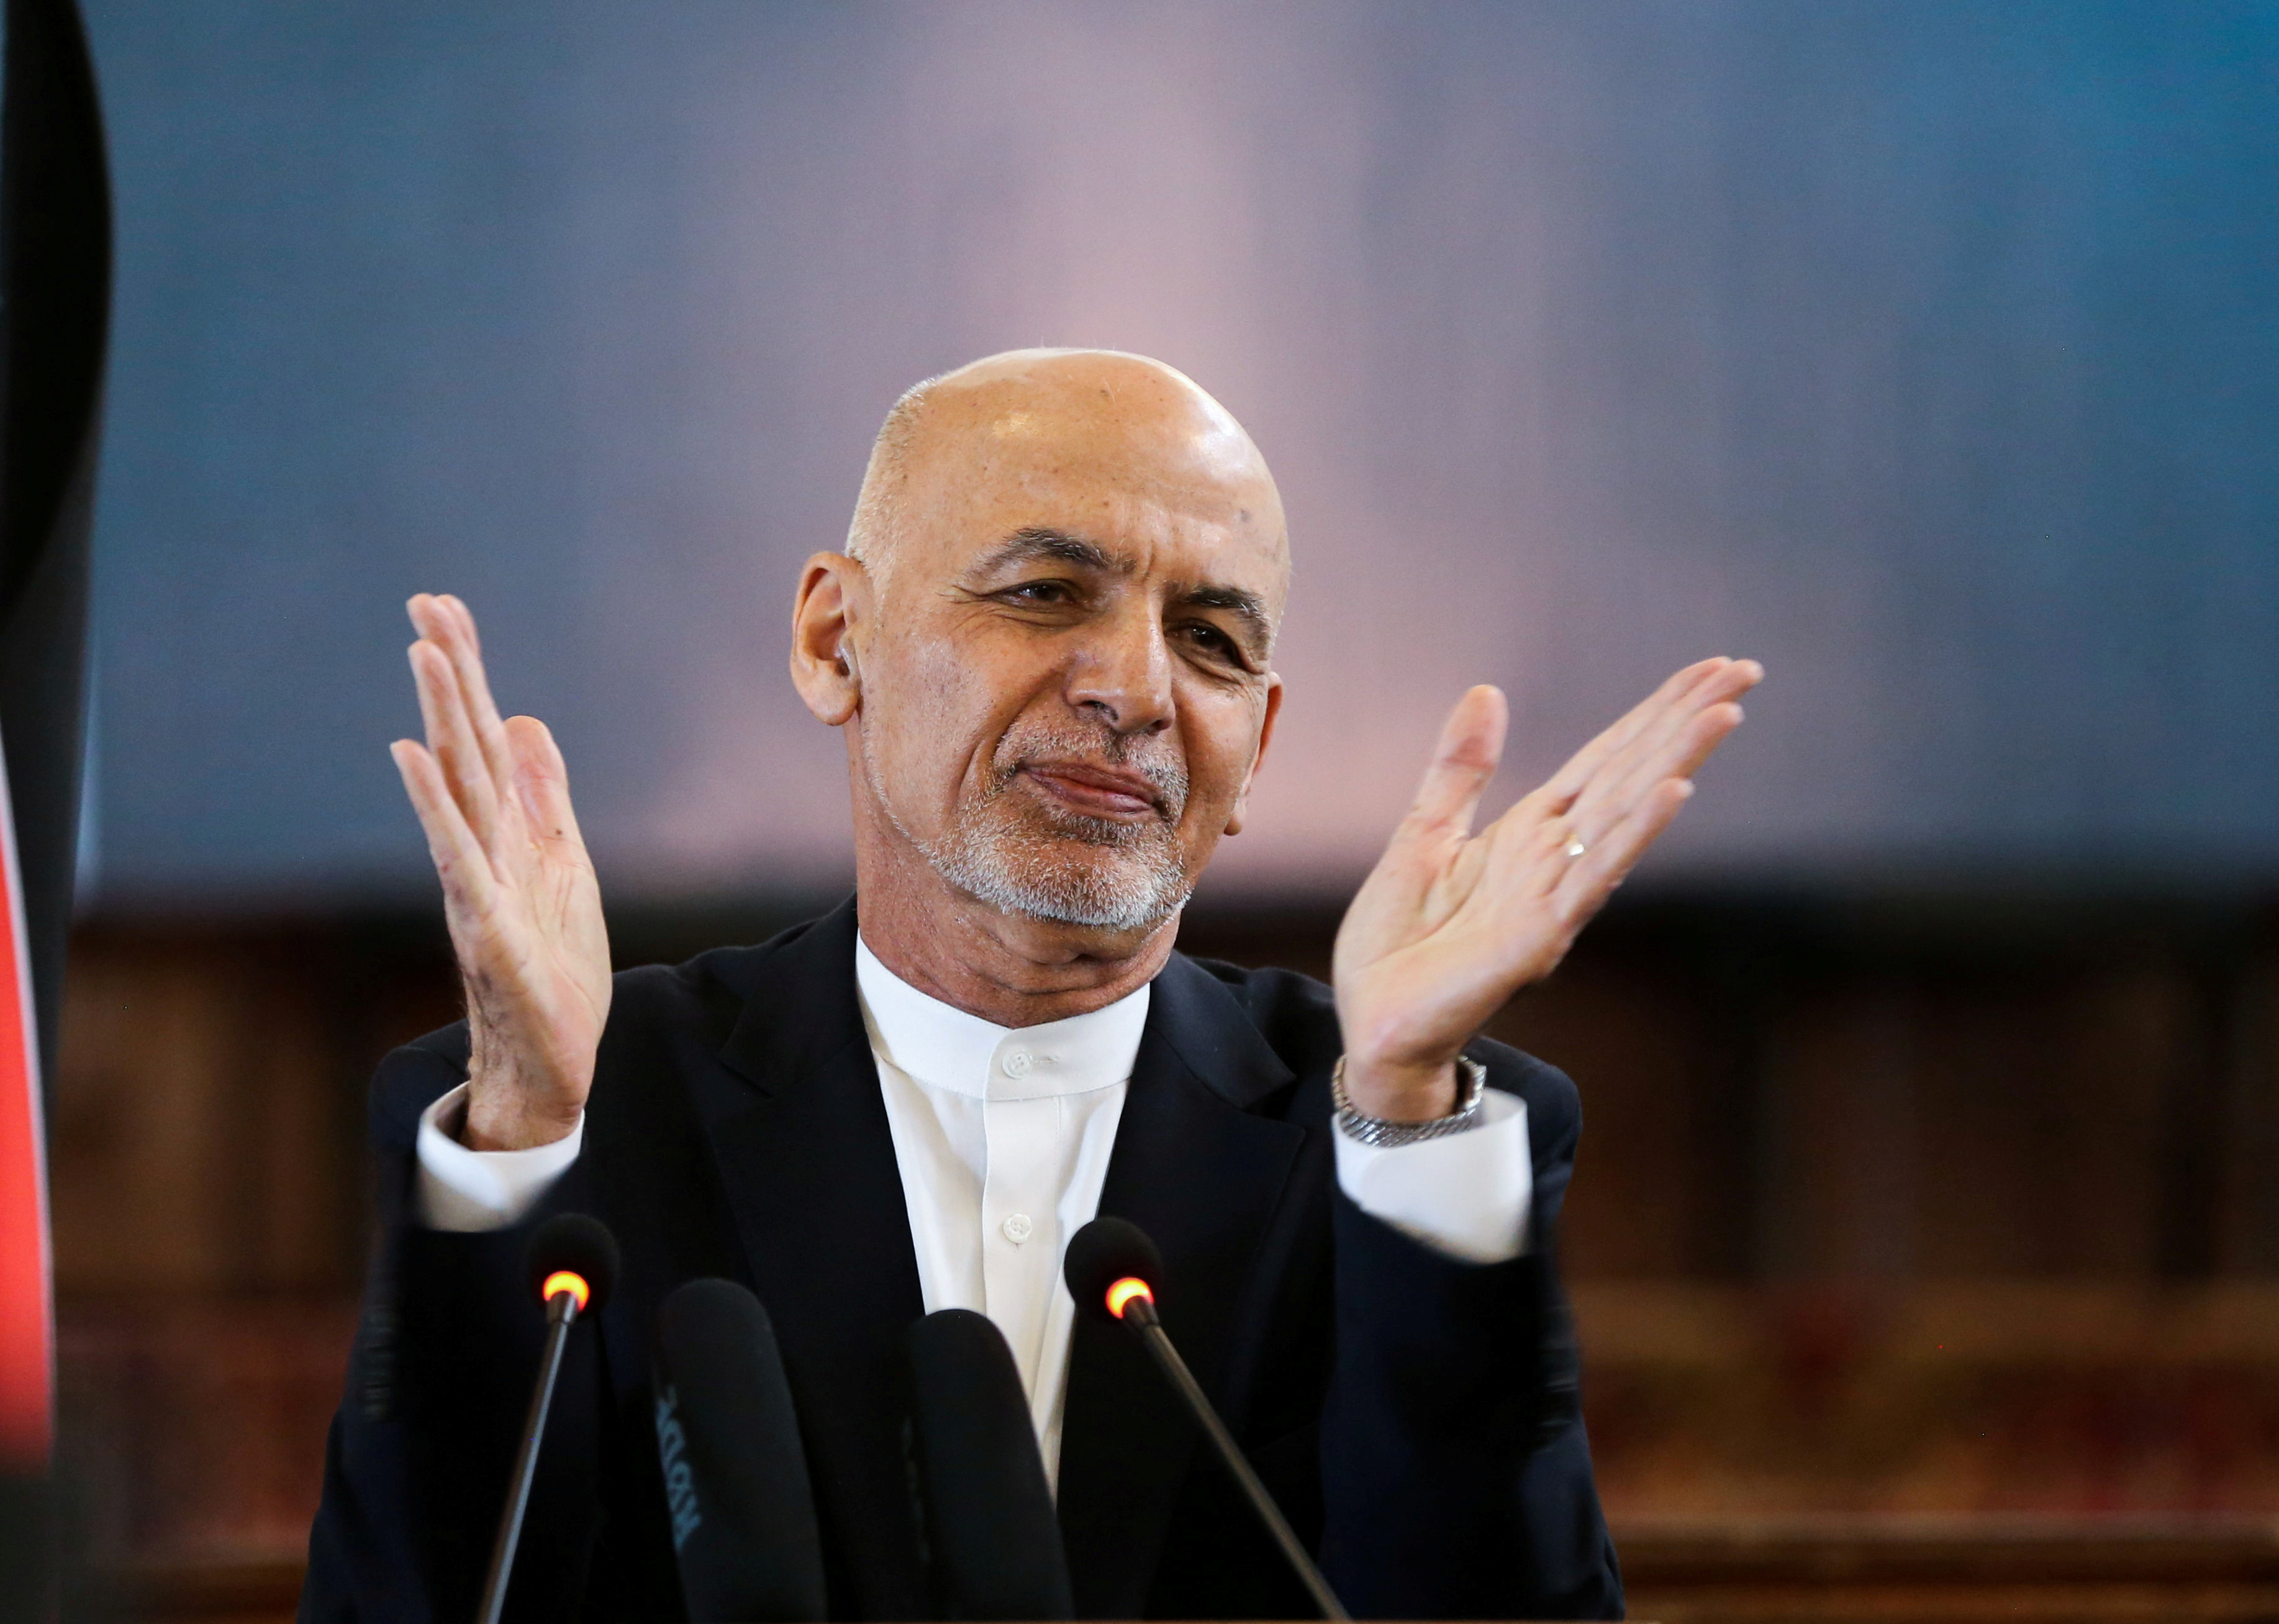 Afghan leader proposes peace road map in three phasesdocument Reuters